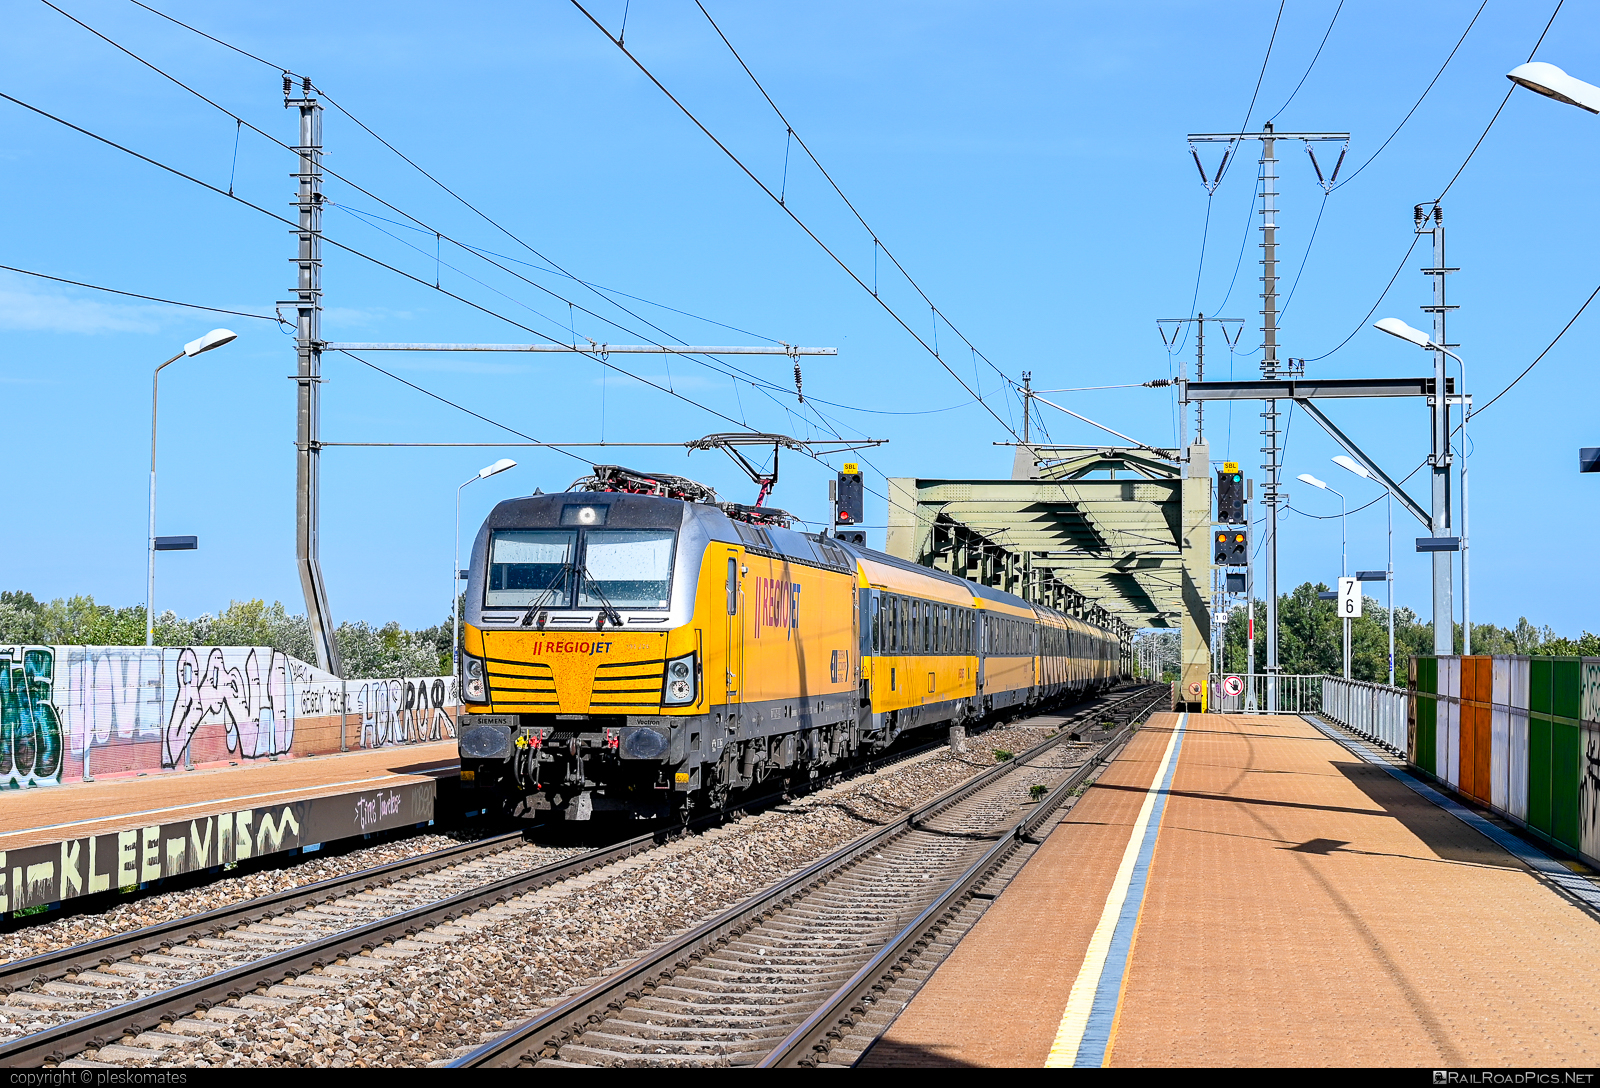 Siemens Vectron MS - 193 226 operated by RegioJet, a.s. #bridge #ell #ellgermany #eloc #europeanlocomotiveleasing #regiojet #siemens #siemensVectron #siemensVectronMS #vectron #vectronMS